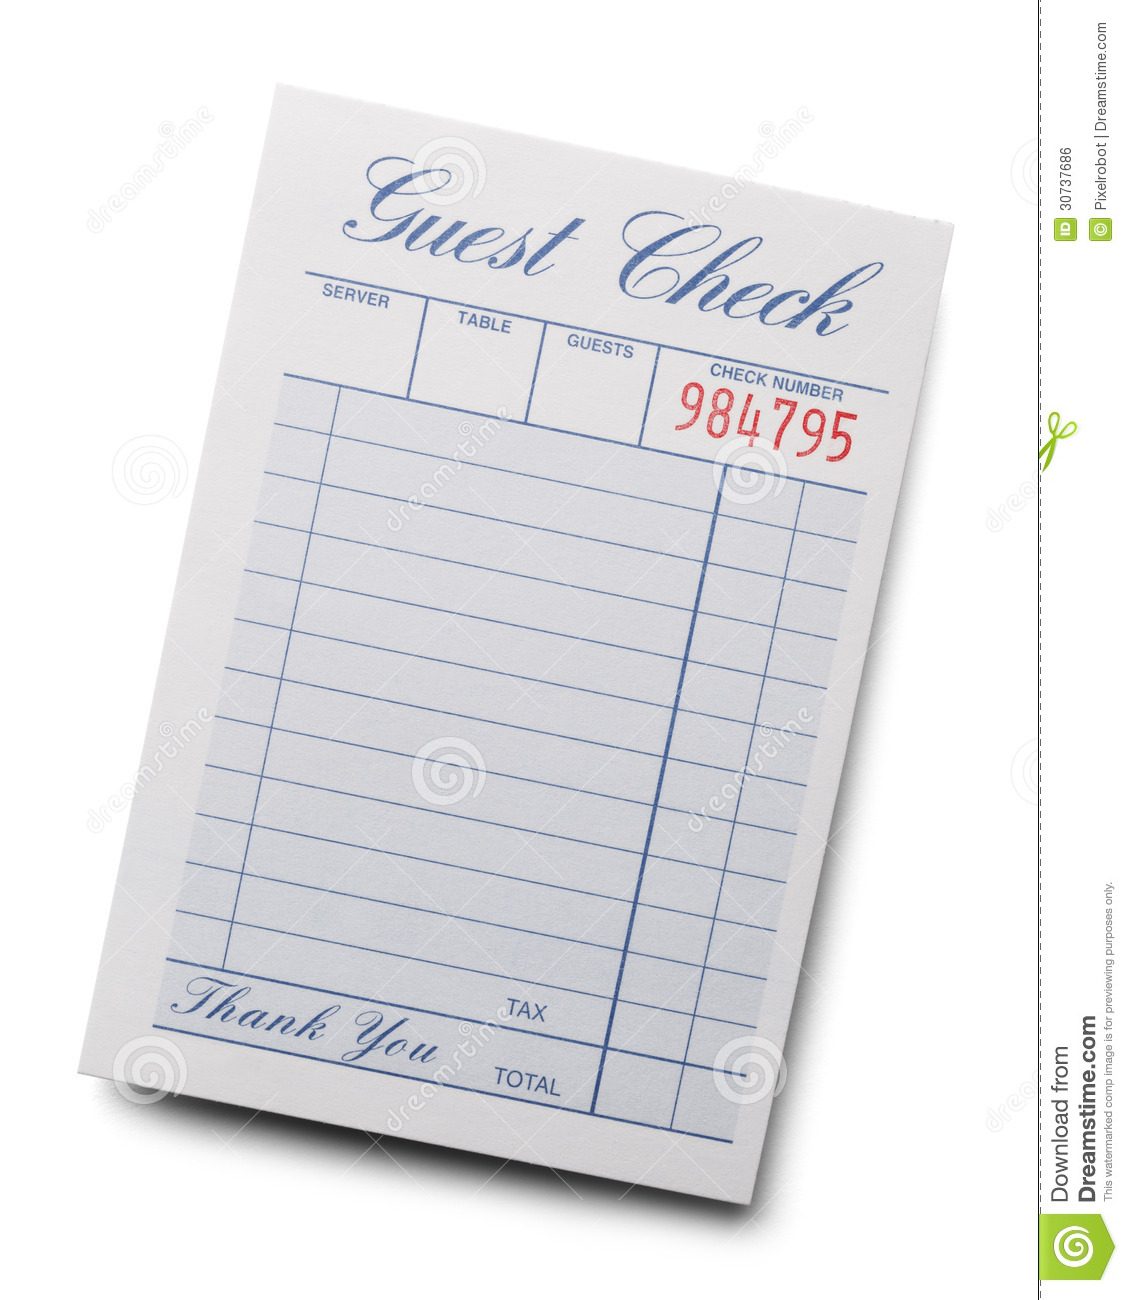 Blue And White Resturant Receipt Check Isolated On A White Background